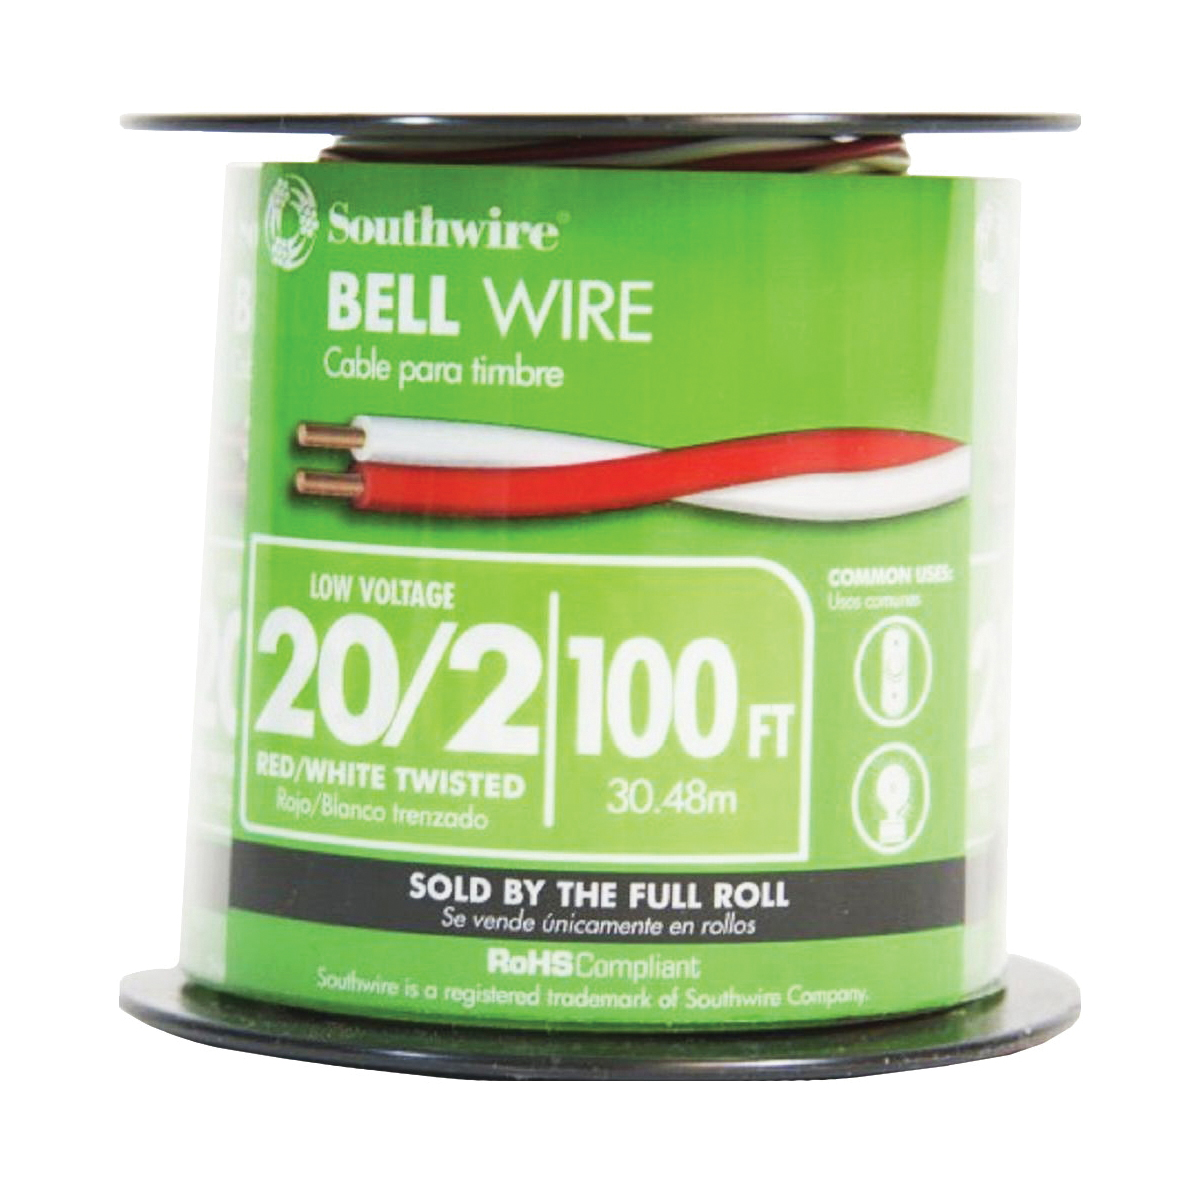 Bell Wire